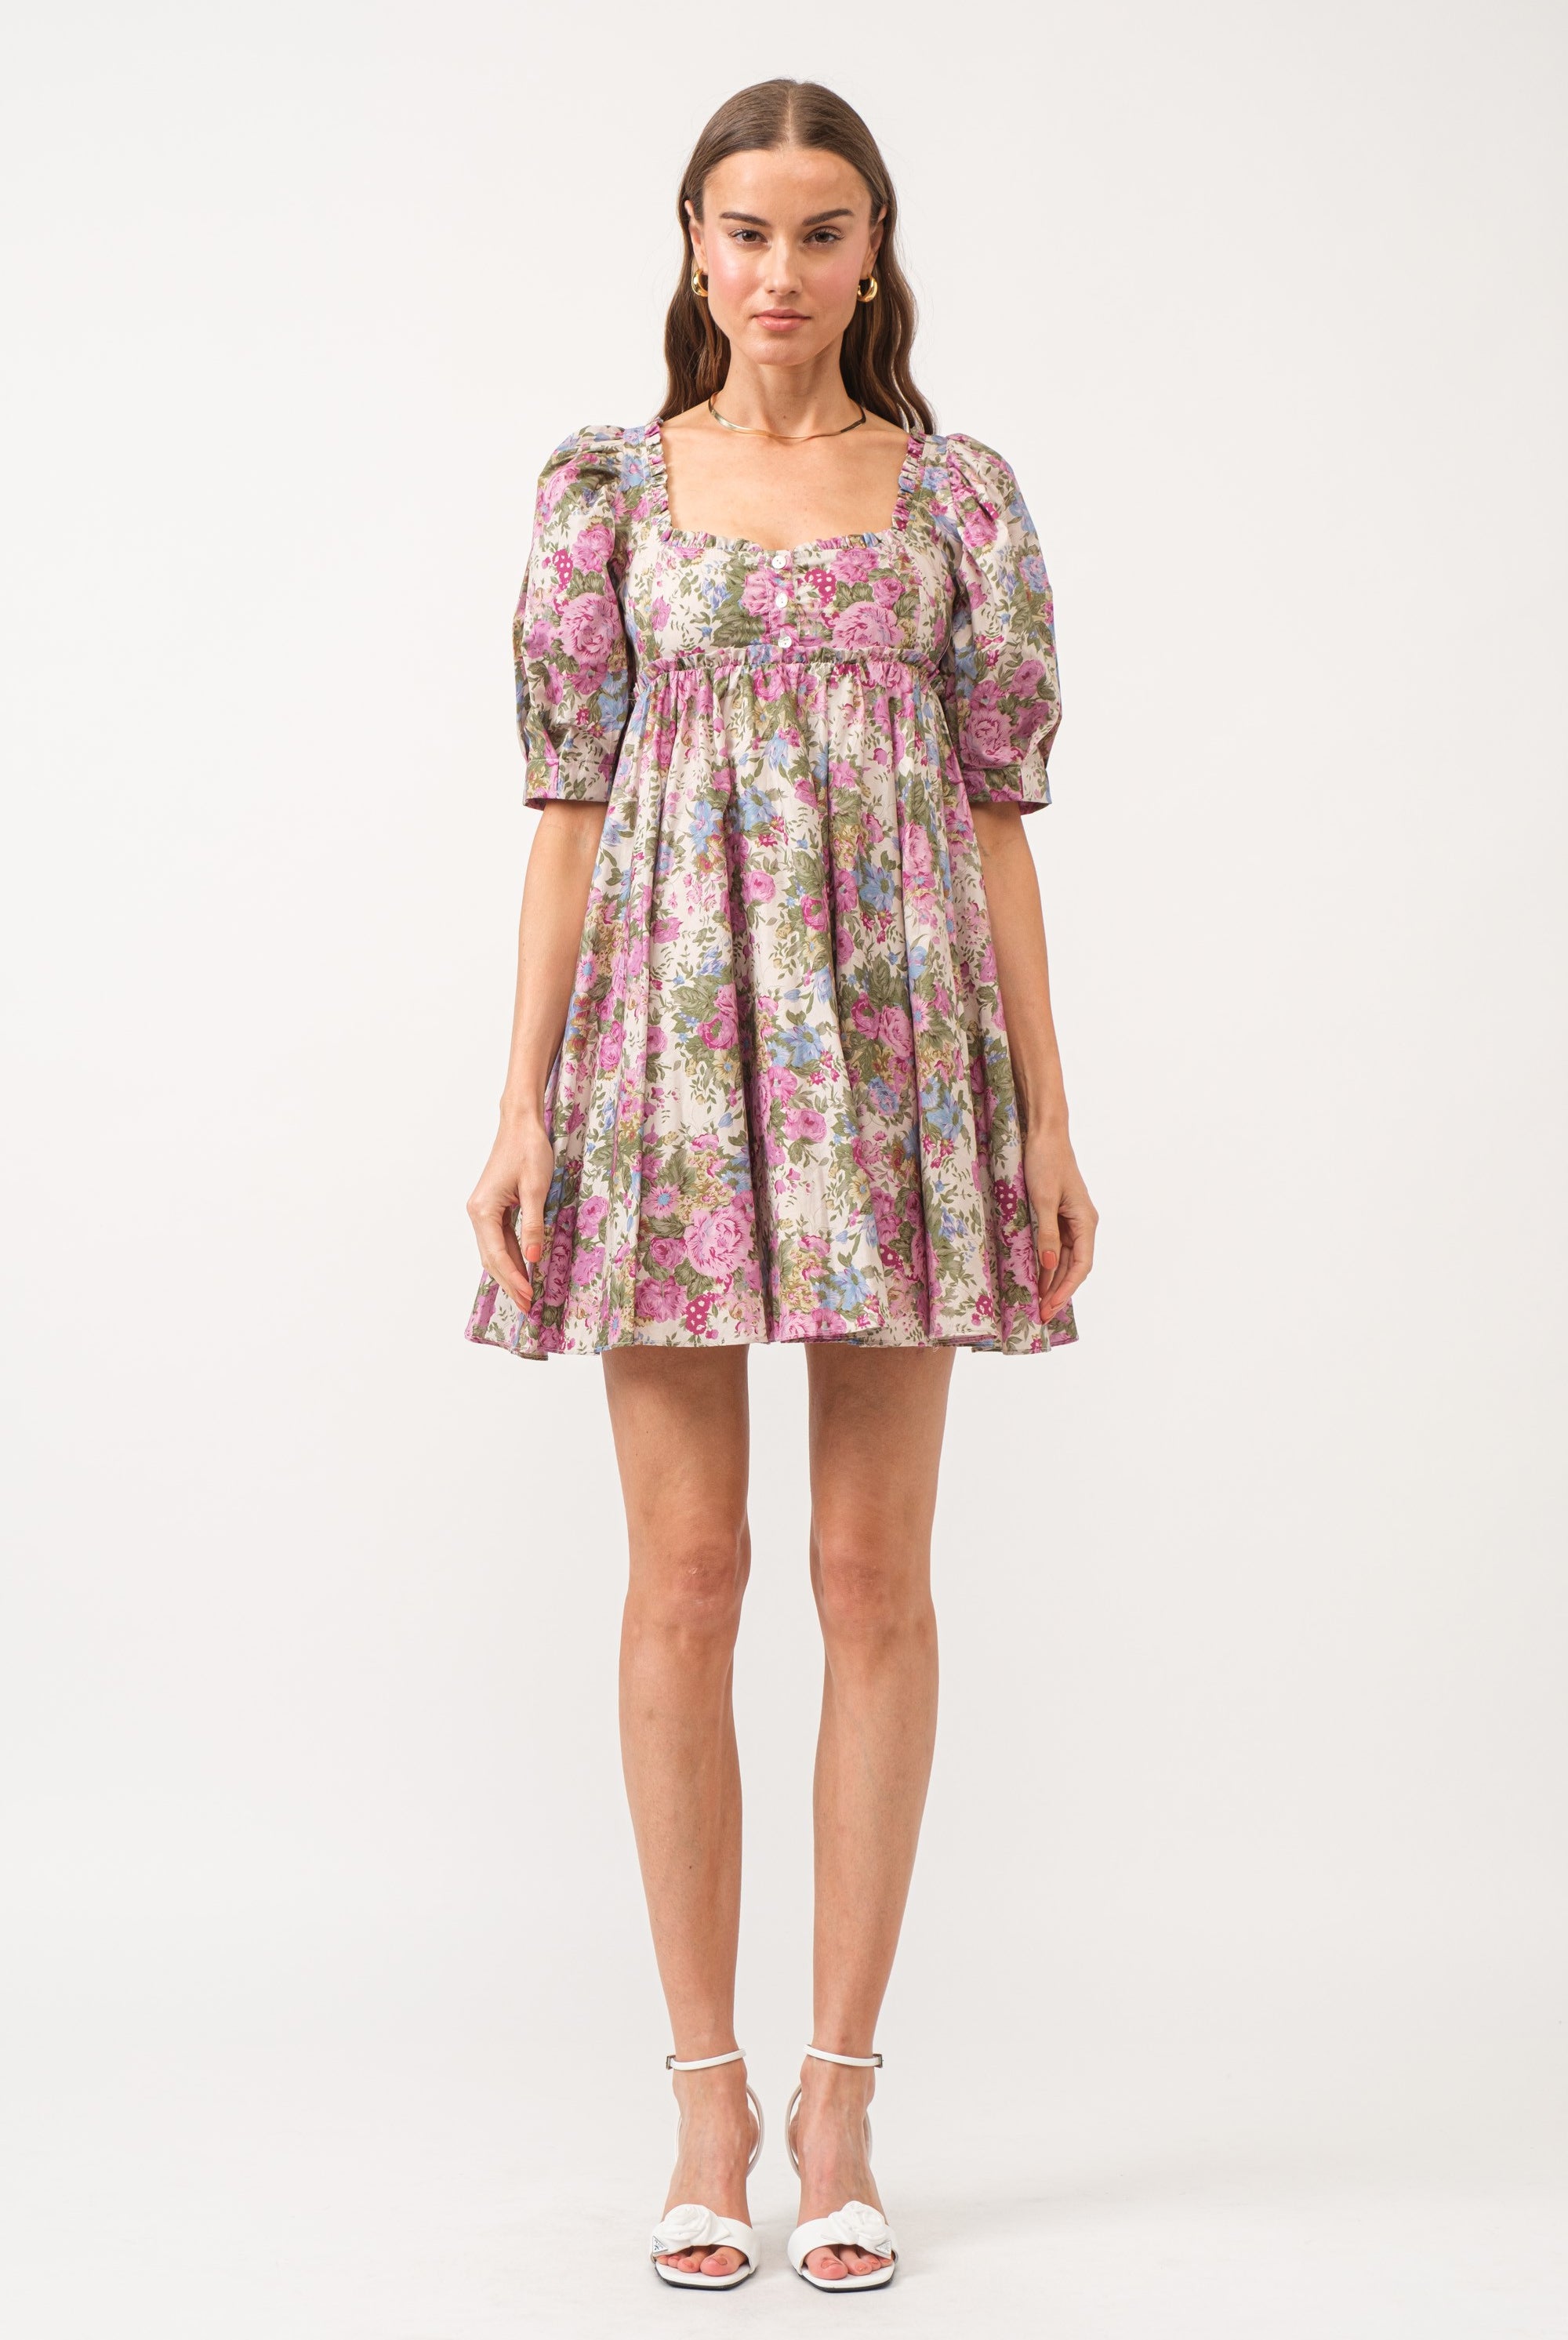 Bobbie Floral Print Puffed Sleeve Dress - Be You Boutique